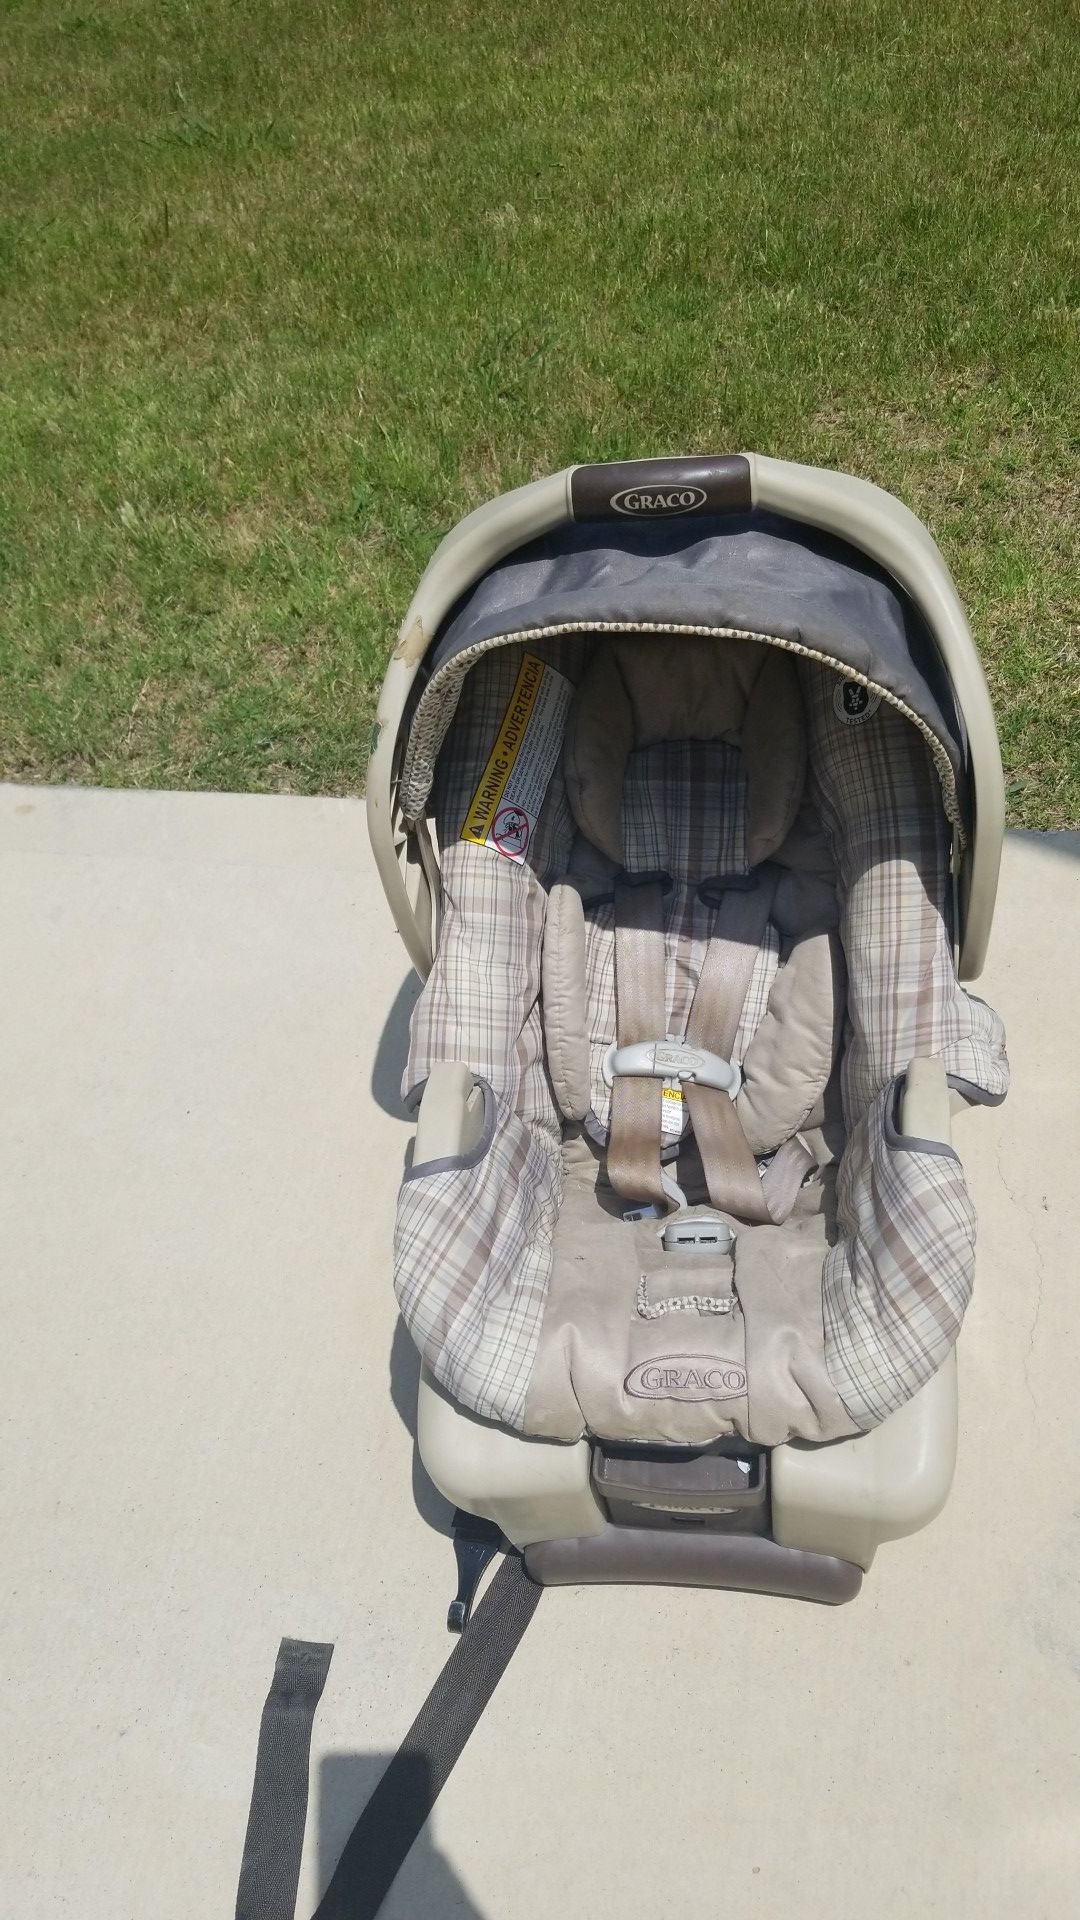 Graco car booster seat and baby stroller